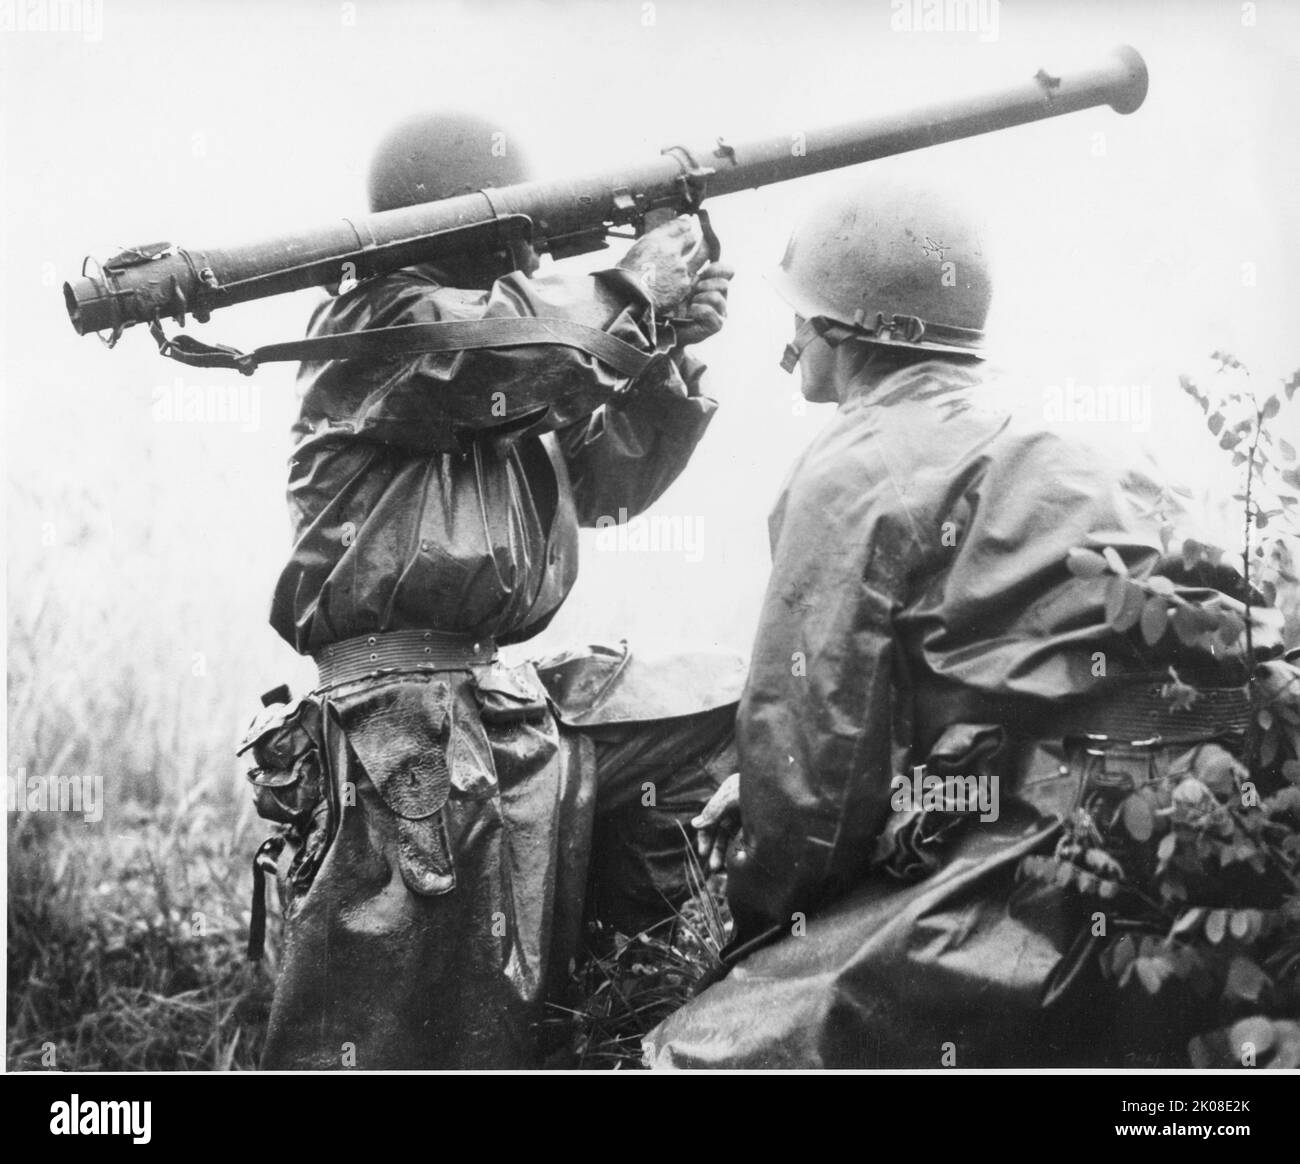 An American soldier, Robert L. Witzig, with a 2.36-inch bazooka prepares to take aim at a North Korean tank during the Battle of Pyongtaek which took place after the Battle of Osan. On his right is Kenneth R. Shadrick, who was later reported as the first American killed in the Korean War. 5 July 1950 Stock Photo